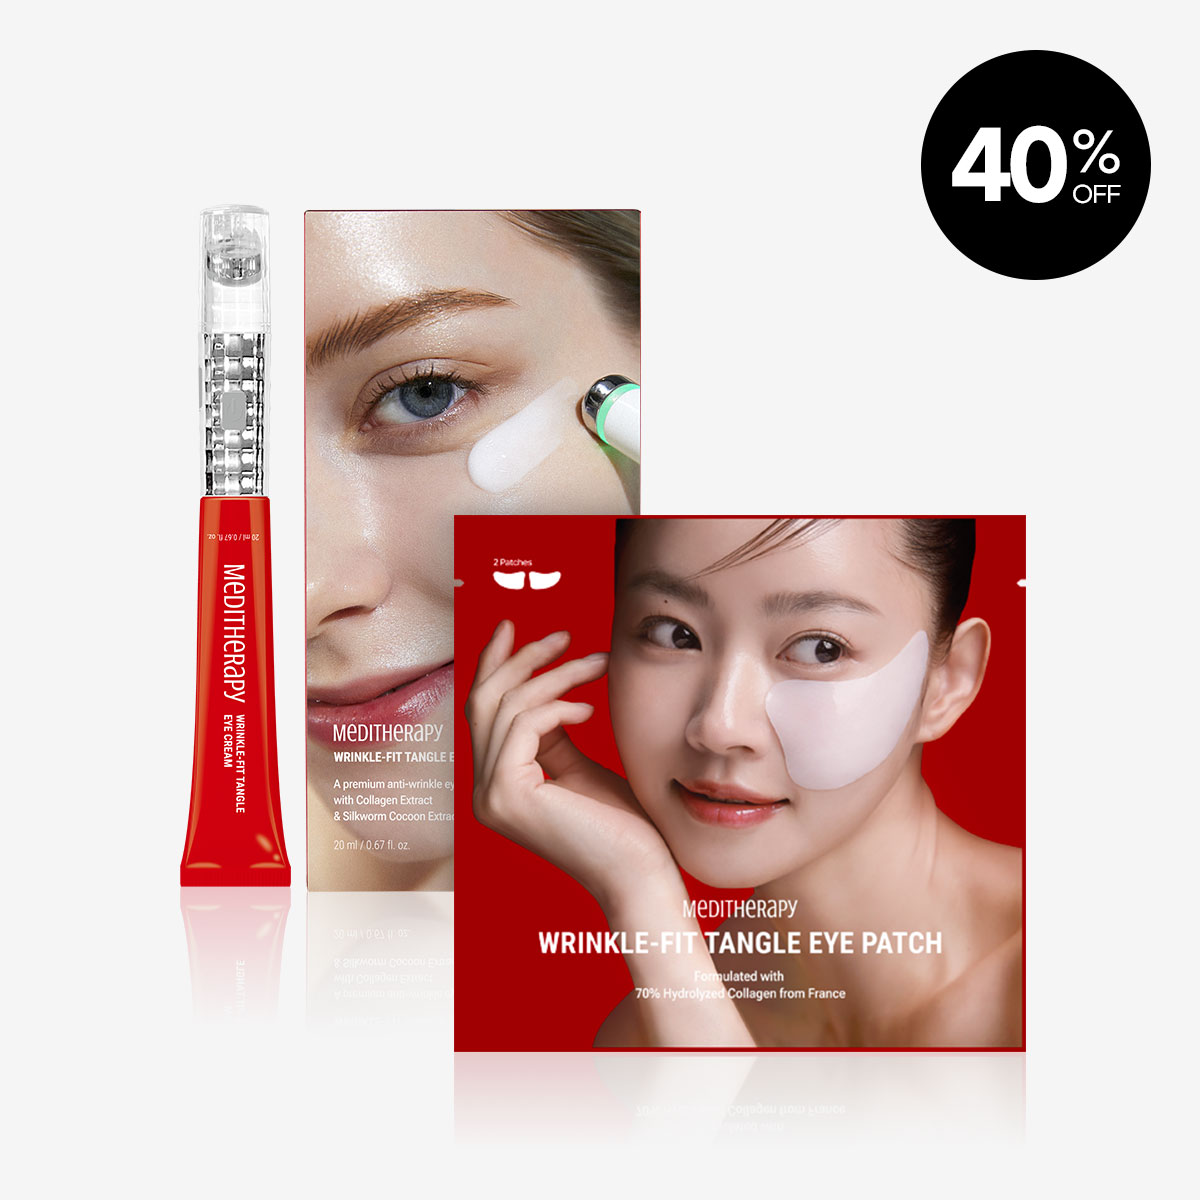 [MEDITHERAPY] Wrinkle-Fit Tangle Eye Cream + Wrinkle-Fit Tangle Eye Patch